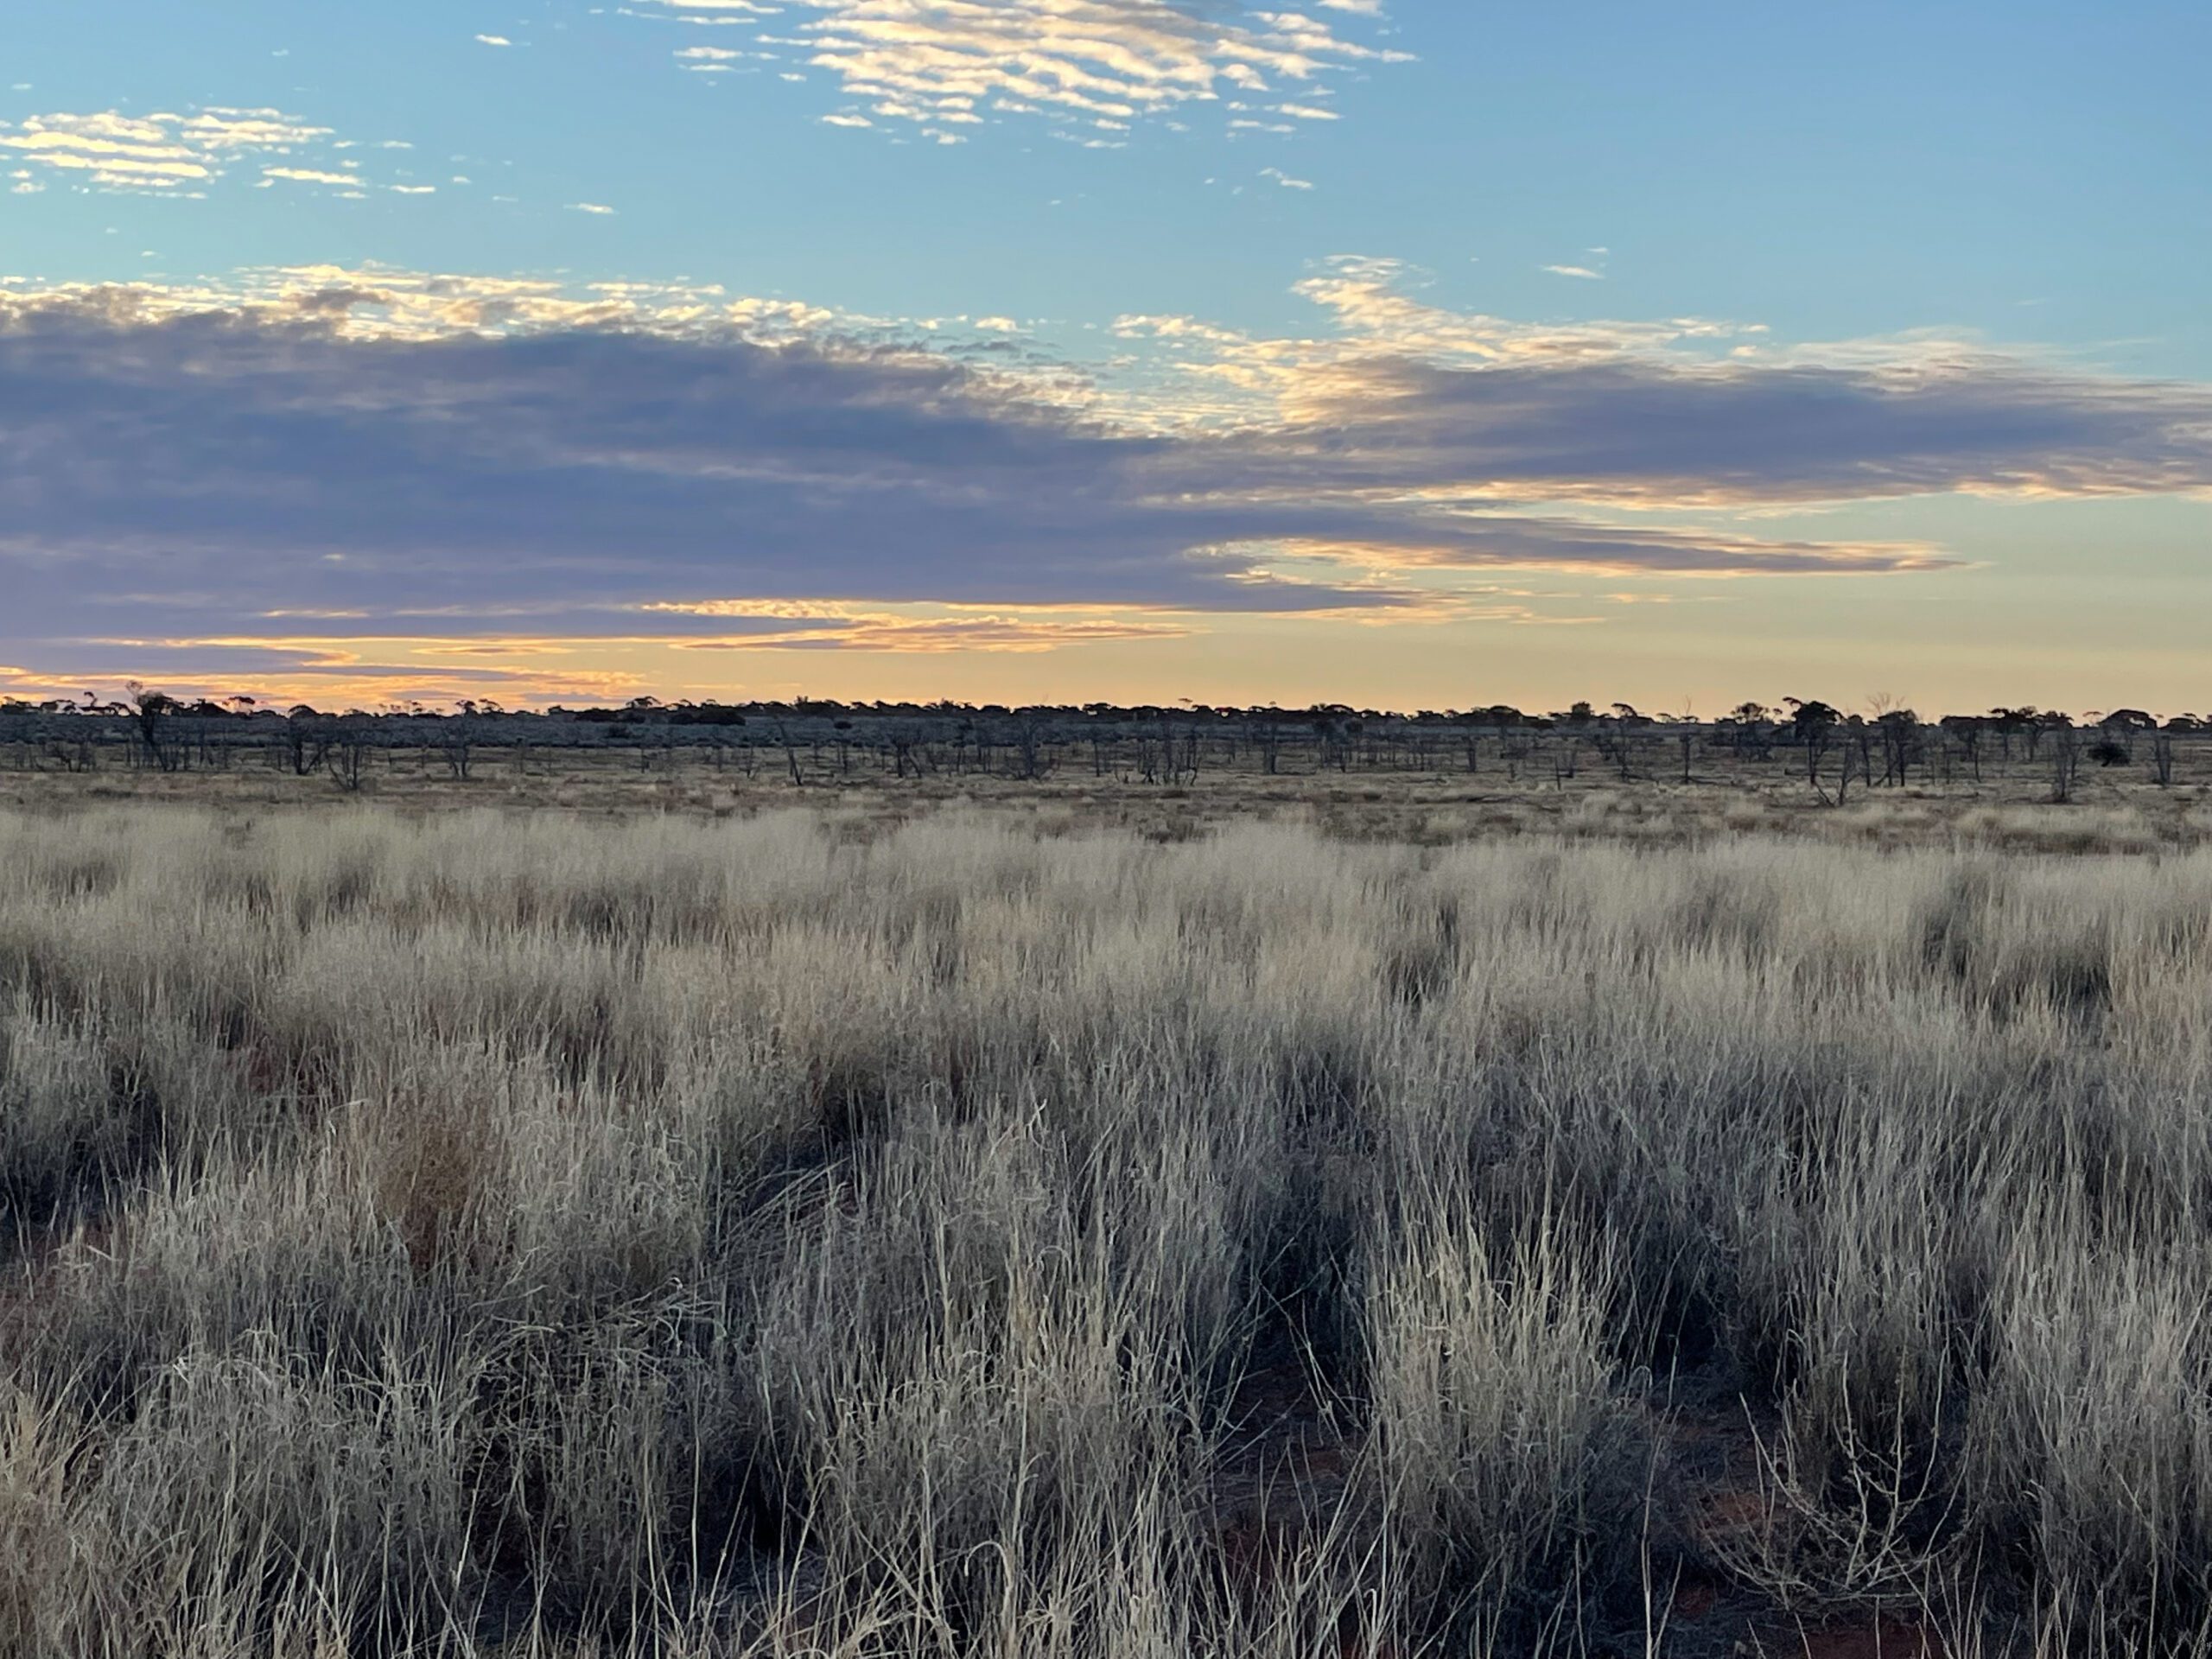 Paddock of tall grasses with sunsetting behind clouds